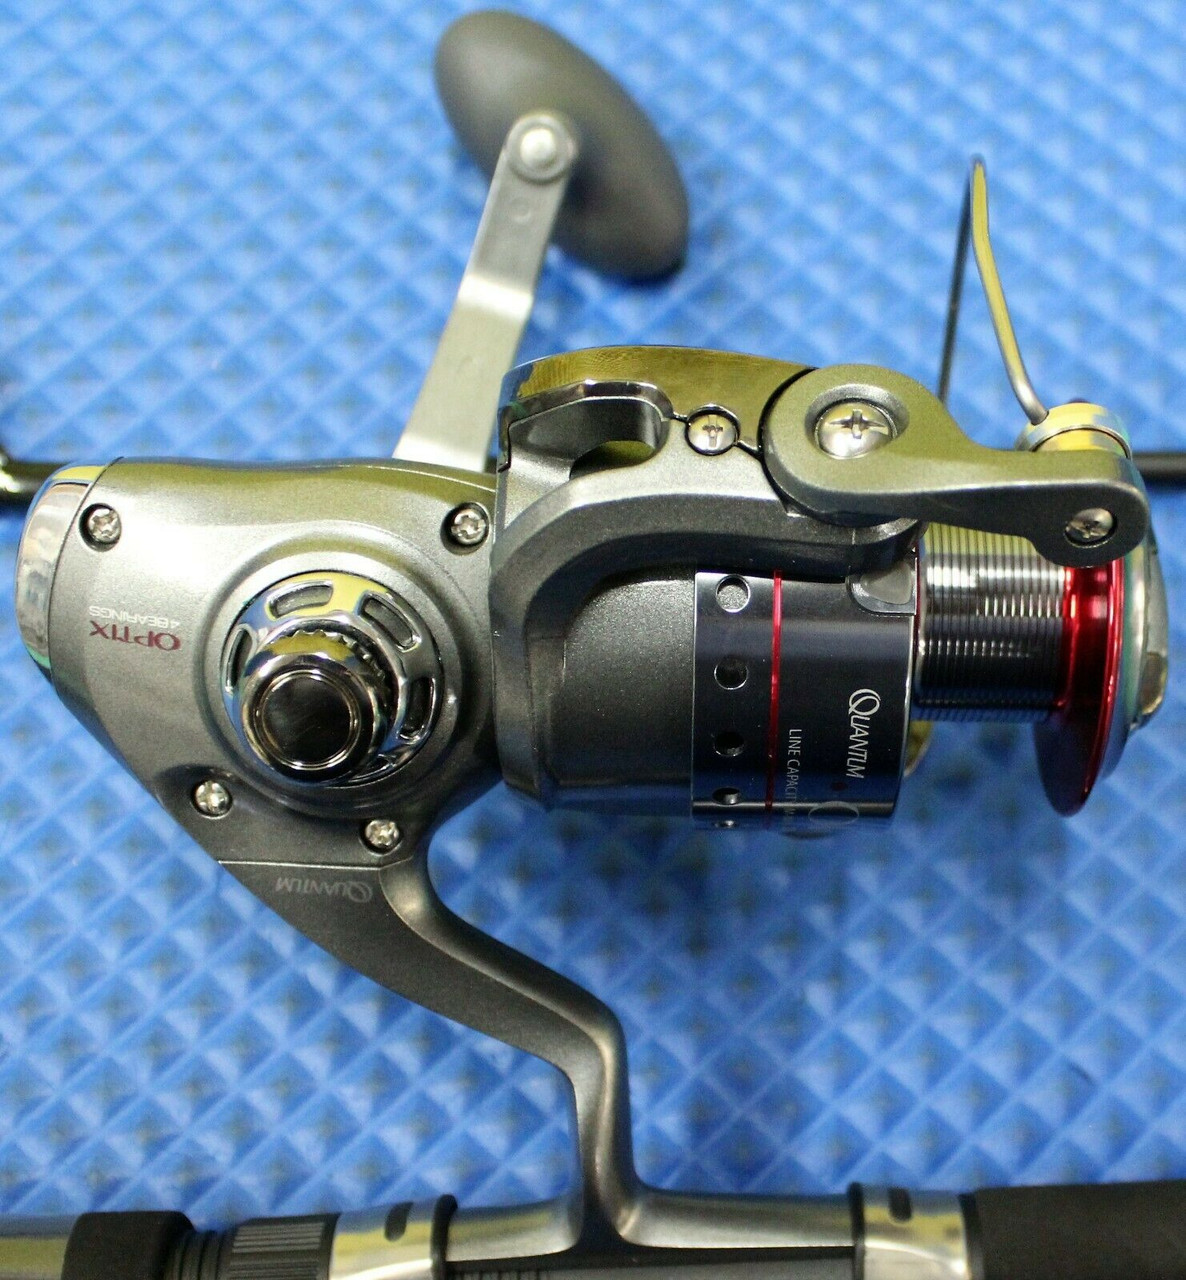 Brand New Quantum Optix Spinning Fishing Reel, Size 60 for Sale